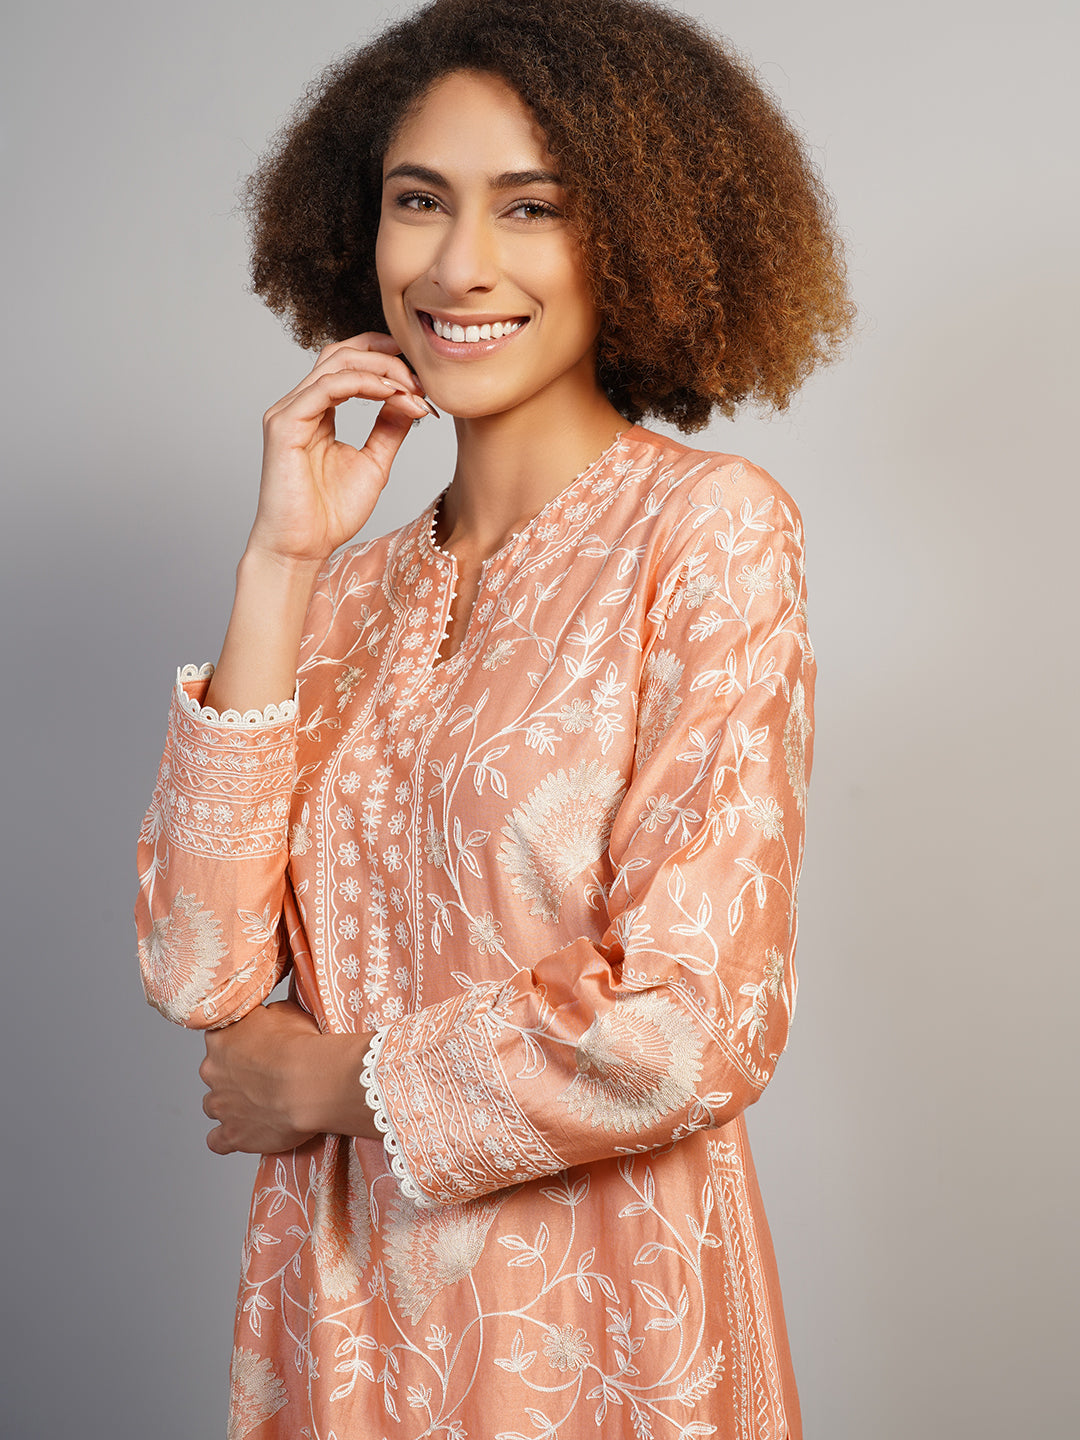 A gorgeous cotton silk suit set in peach that is adorned with Aari work in off-white silk yarn